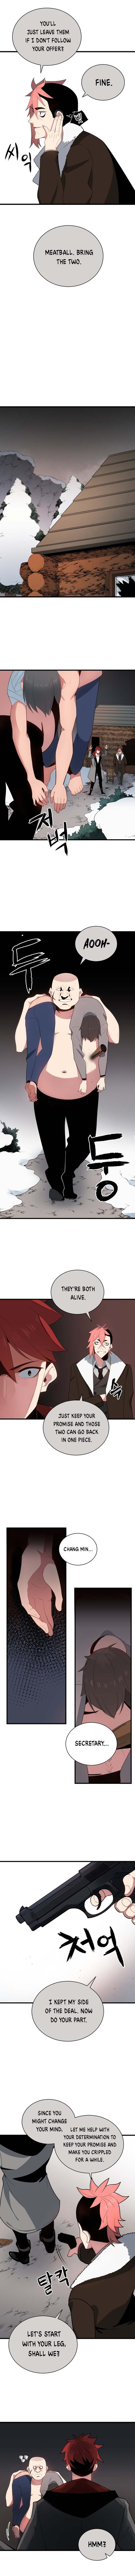 The Descent of the Demonic Master - Chapter 27 Page 7